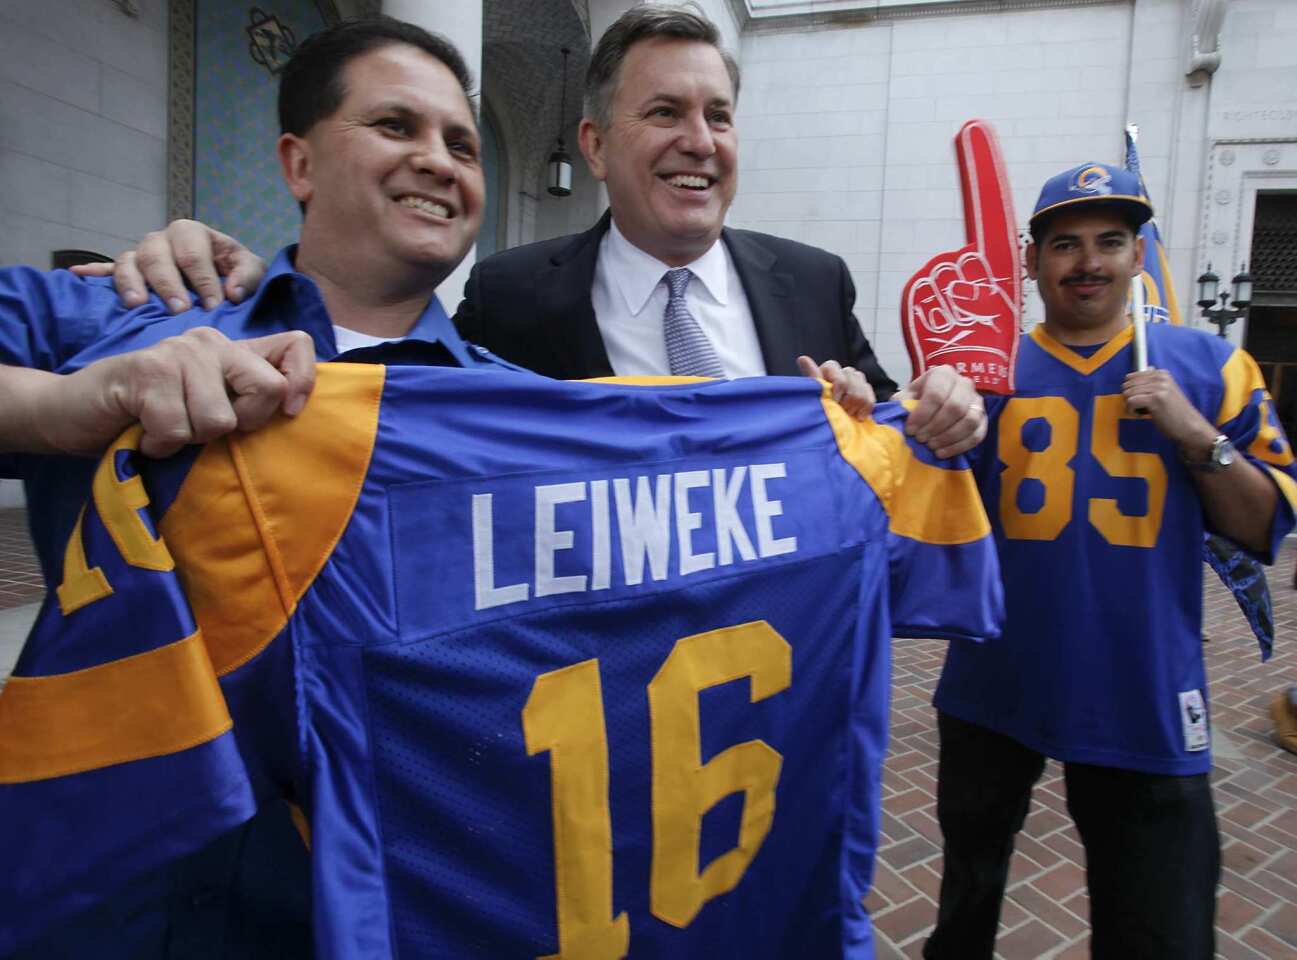 Tom Bateman of Bring Back the Rams presents a jersey to Tim Leiweke, president of Anschutz Entertainment Group, to celebrate the delivery of a $27-million environmental impact report on a downtown football stadium that Anschutz hopes to build to bring the NFL back to Los Angeles.